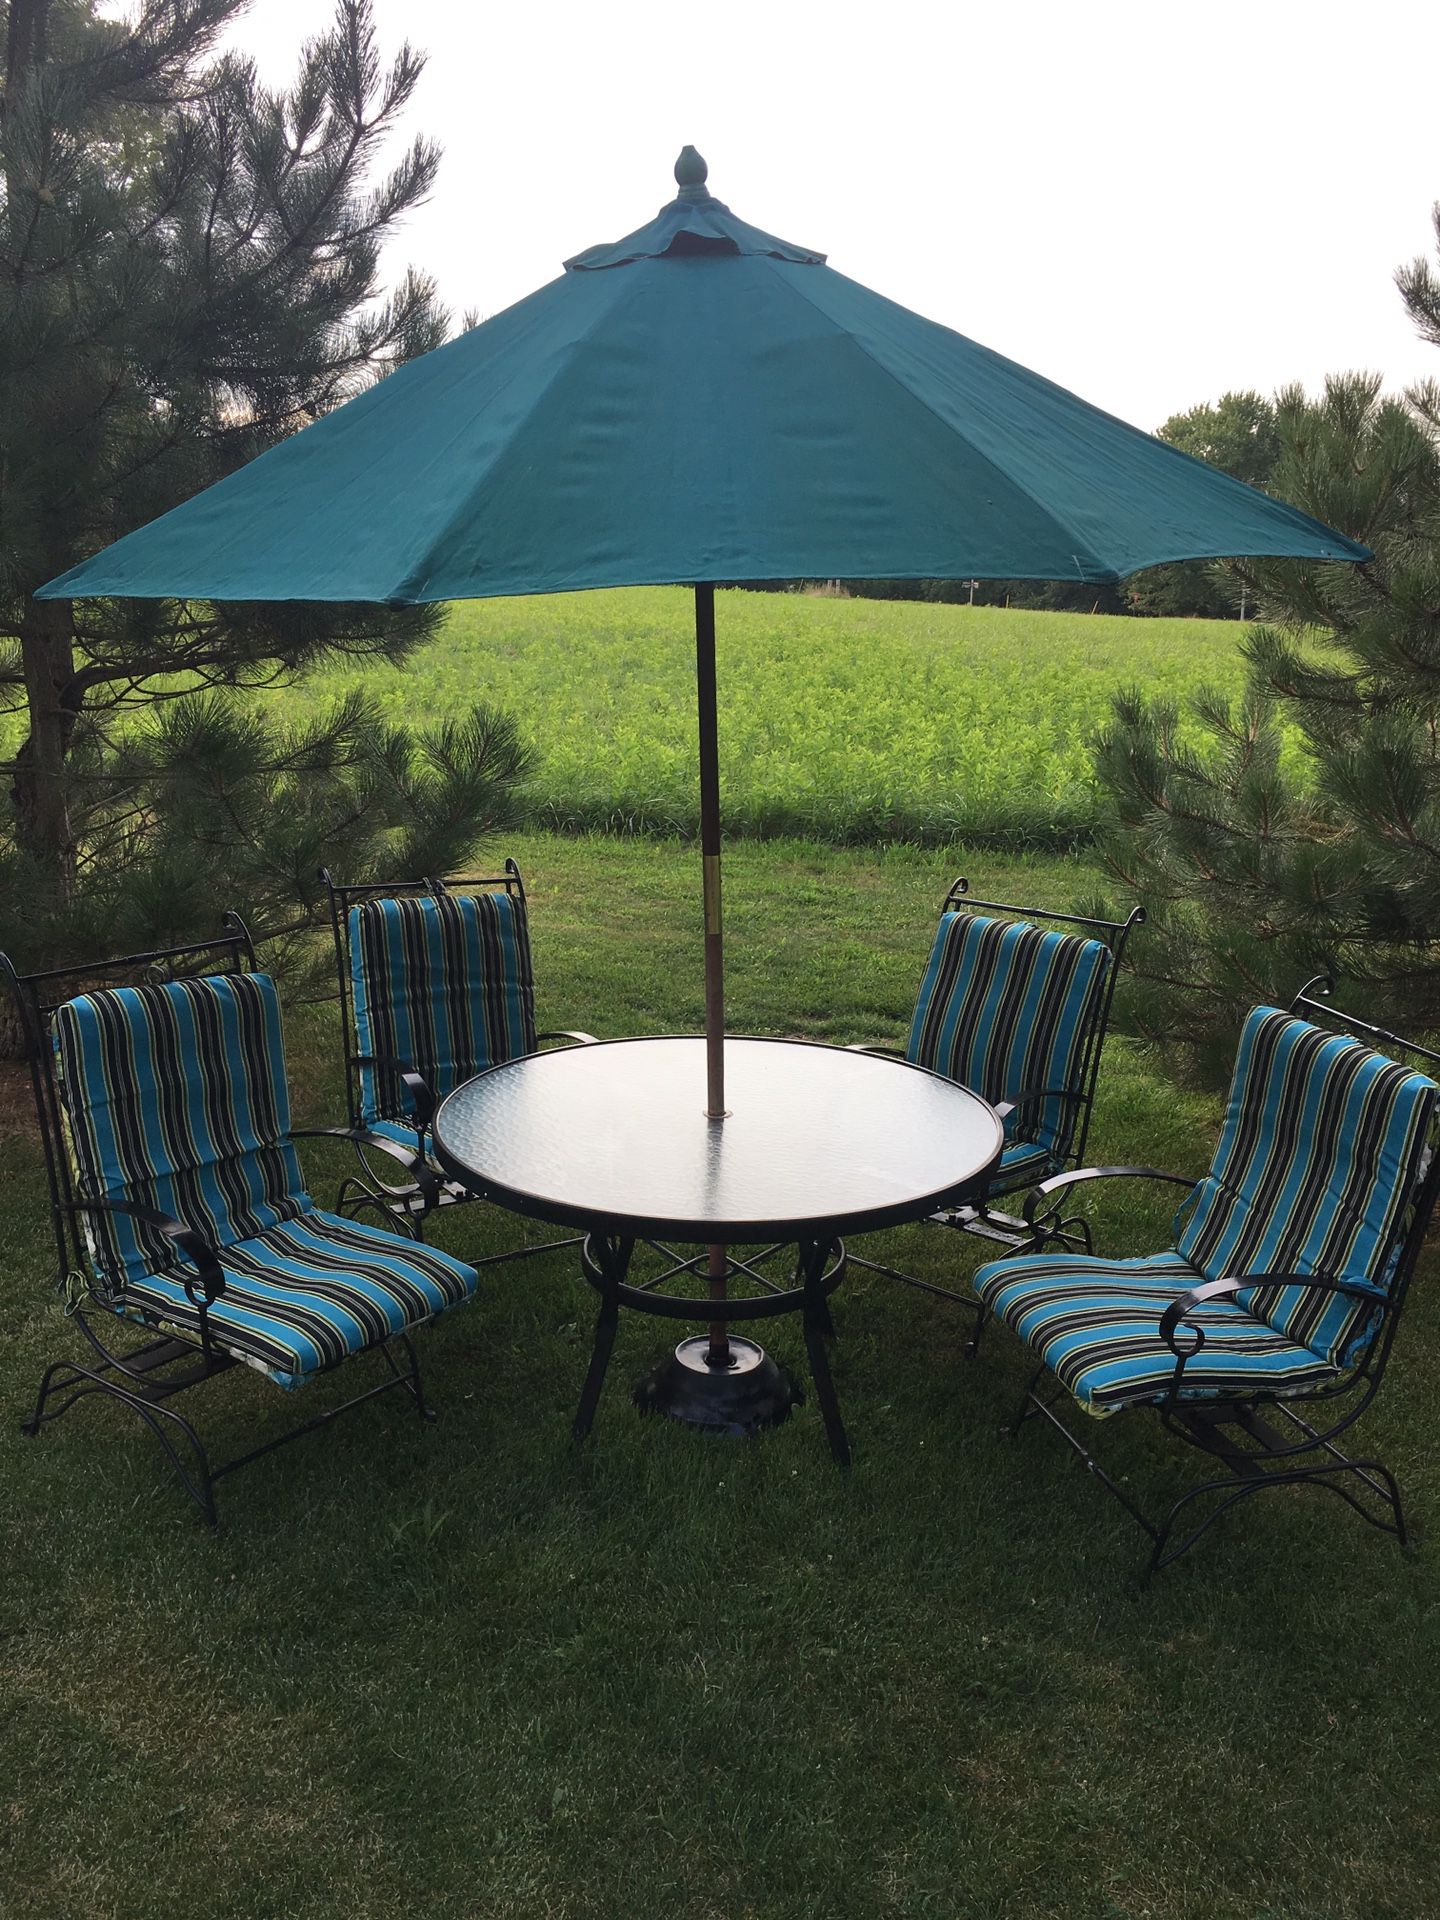 Patio set 11 pieces table for chairs market umbrella With stand and for a new reversible cushions made of metal very strong and chairs have a little